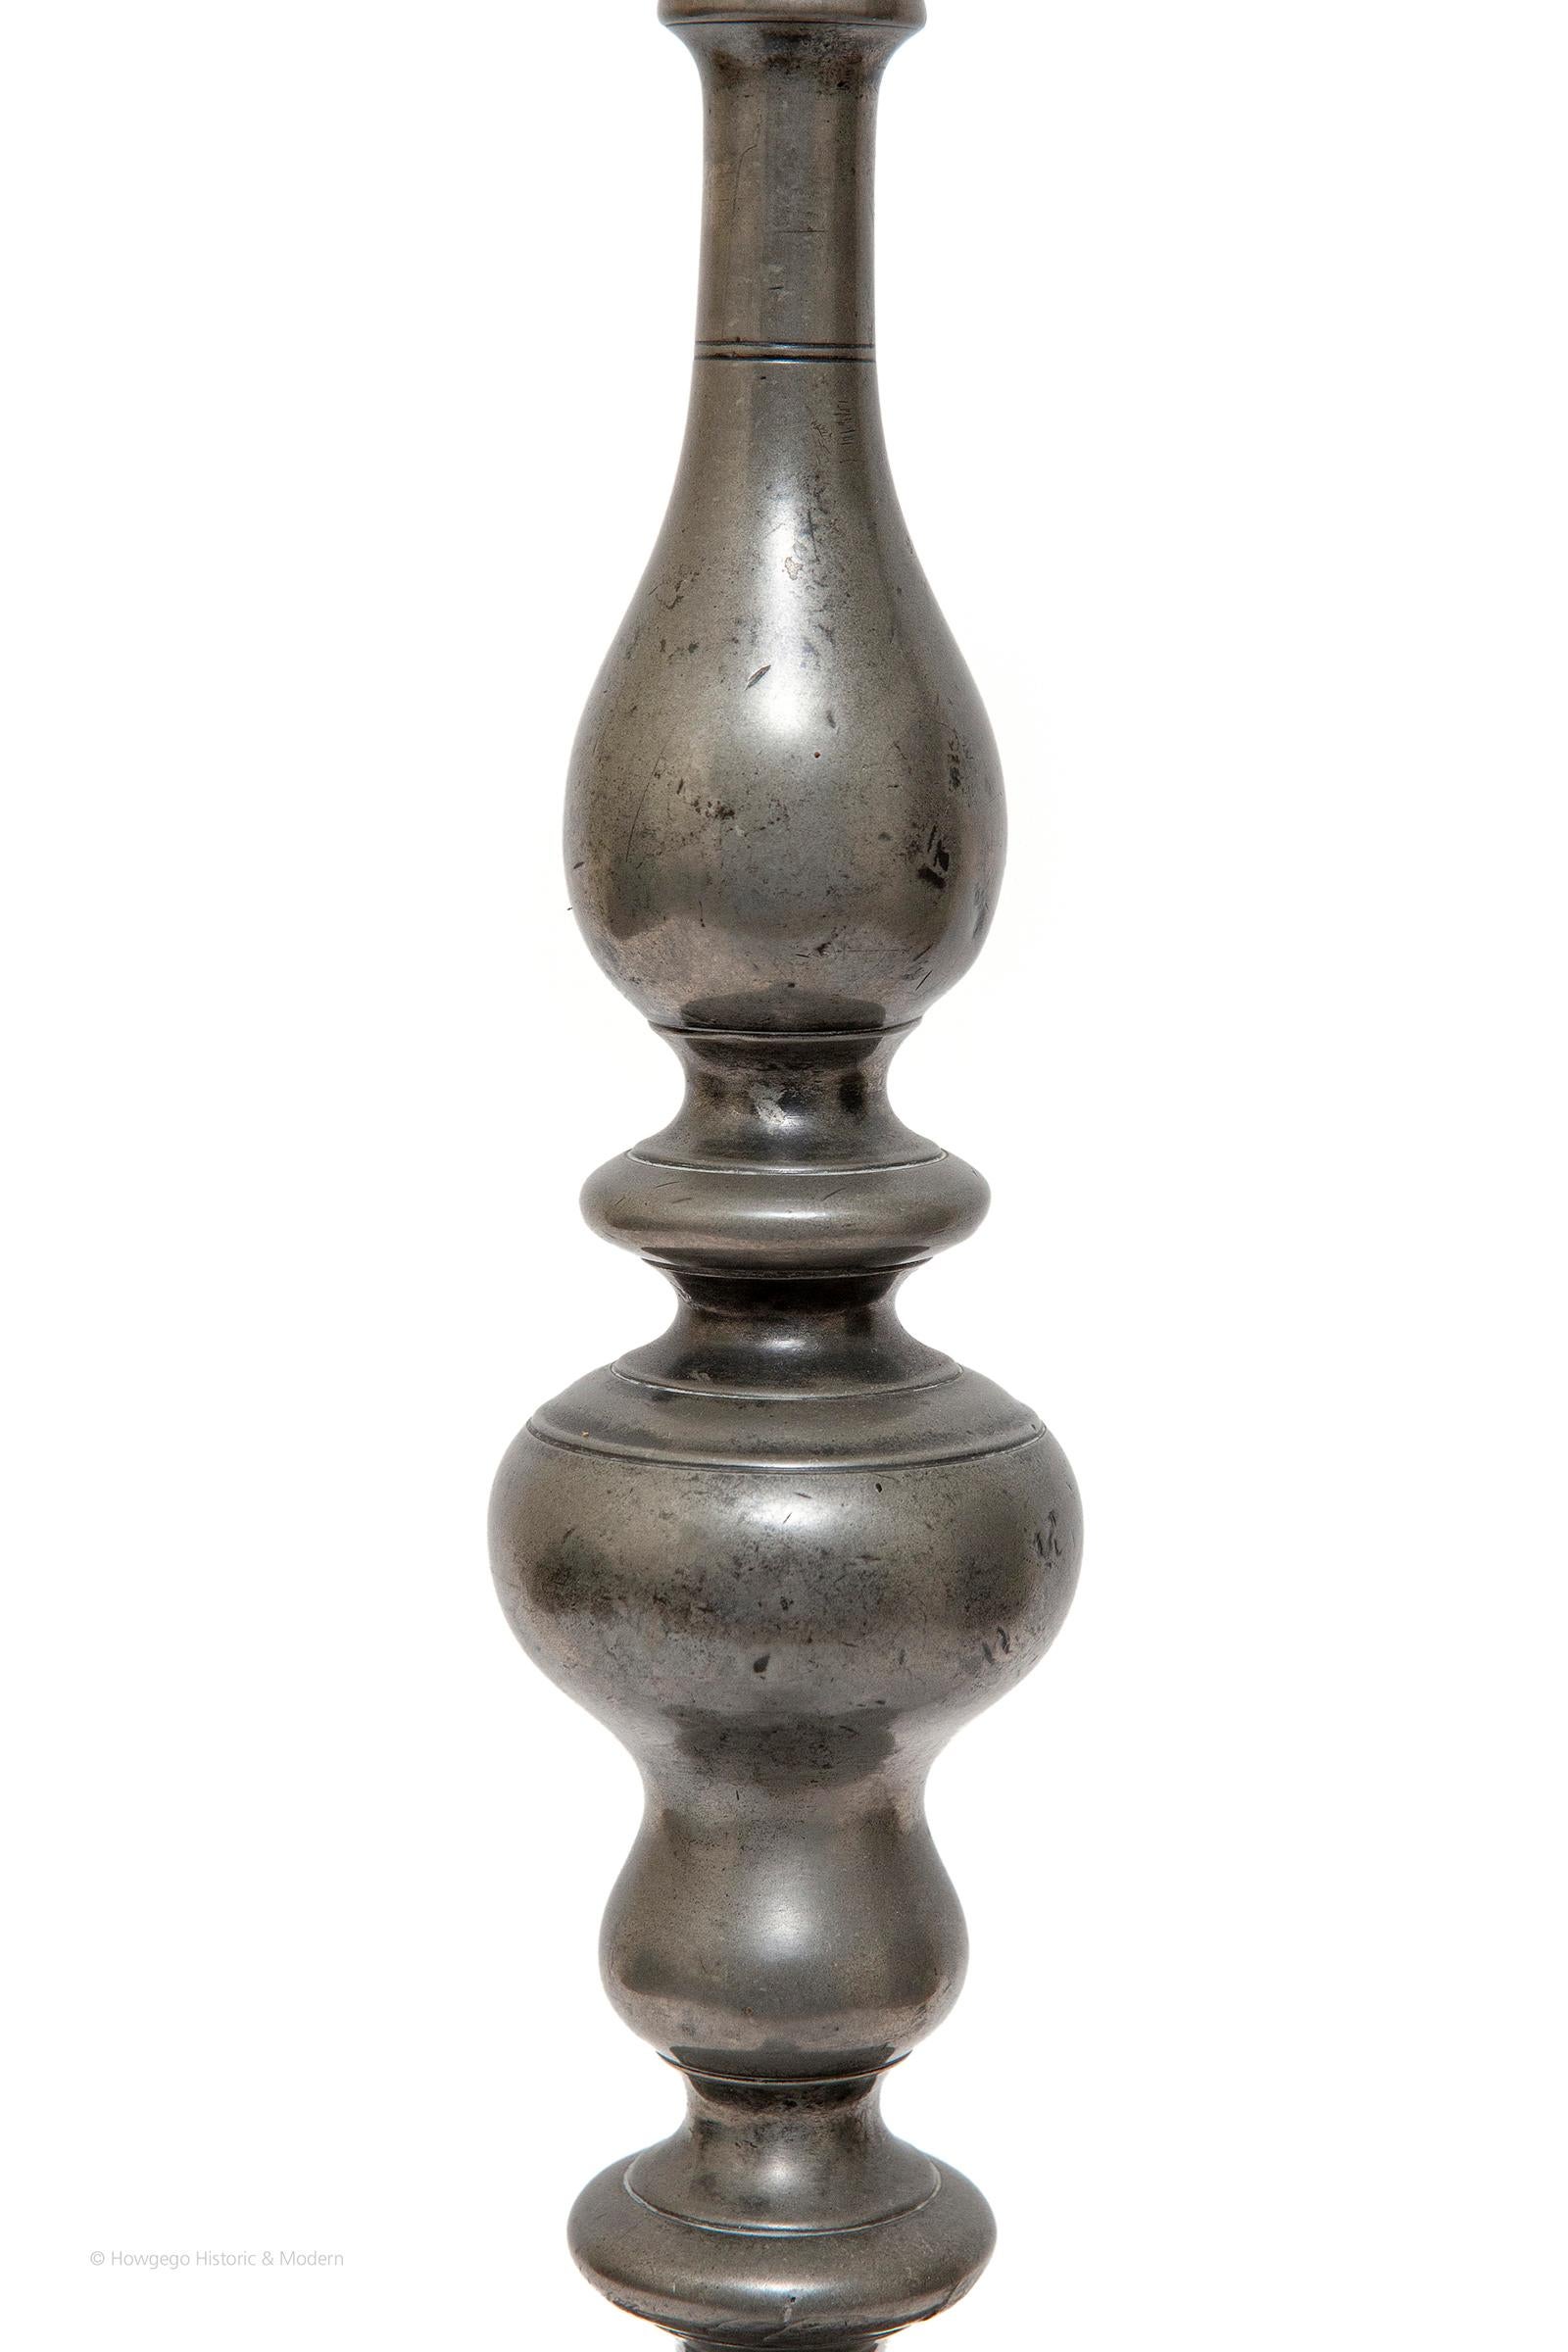 Exceptionally rare, 17th century, pewter candlestick upcycled into a table lamp, 20” high

Elegant, classical form typical of the Baroque period, with all the surfaces reflecting light 
Surviving pewter pieces from this period are rare as it is a